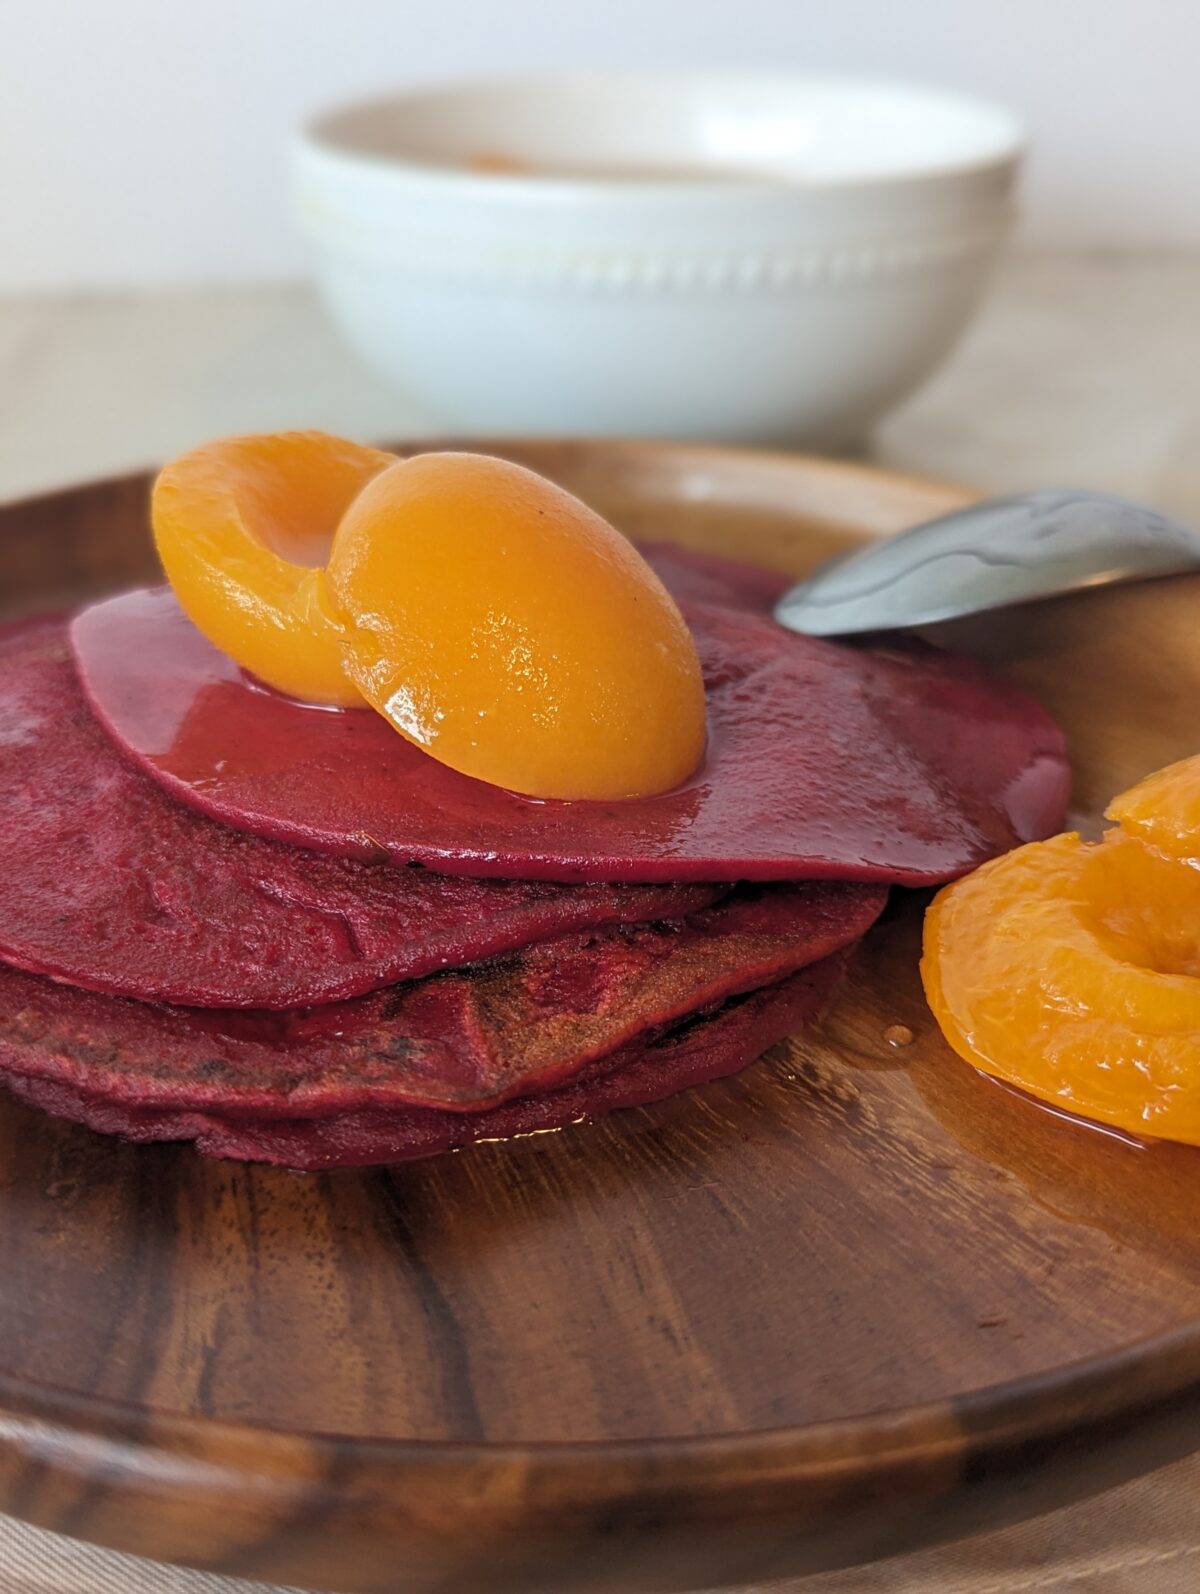 A stack of dark pink pancakes sit on a wooden plate, topped with apricots in syrup. A white bowl of apricots sits in the background, with an upturned spoon on the plate.